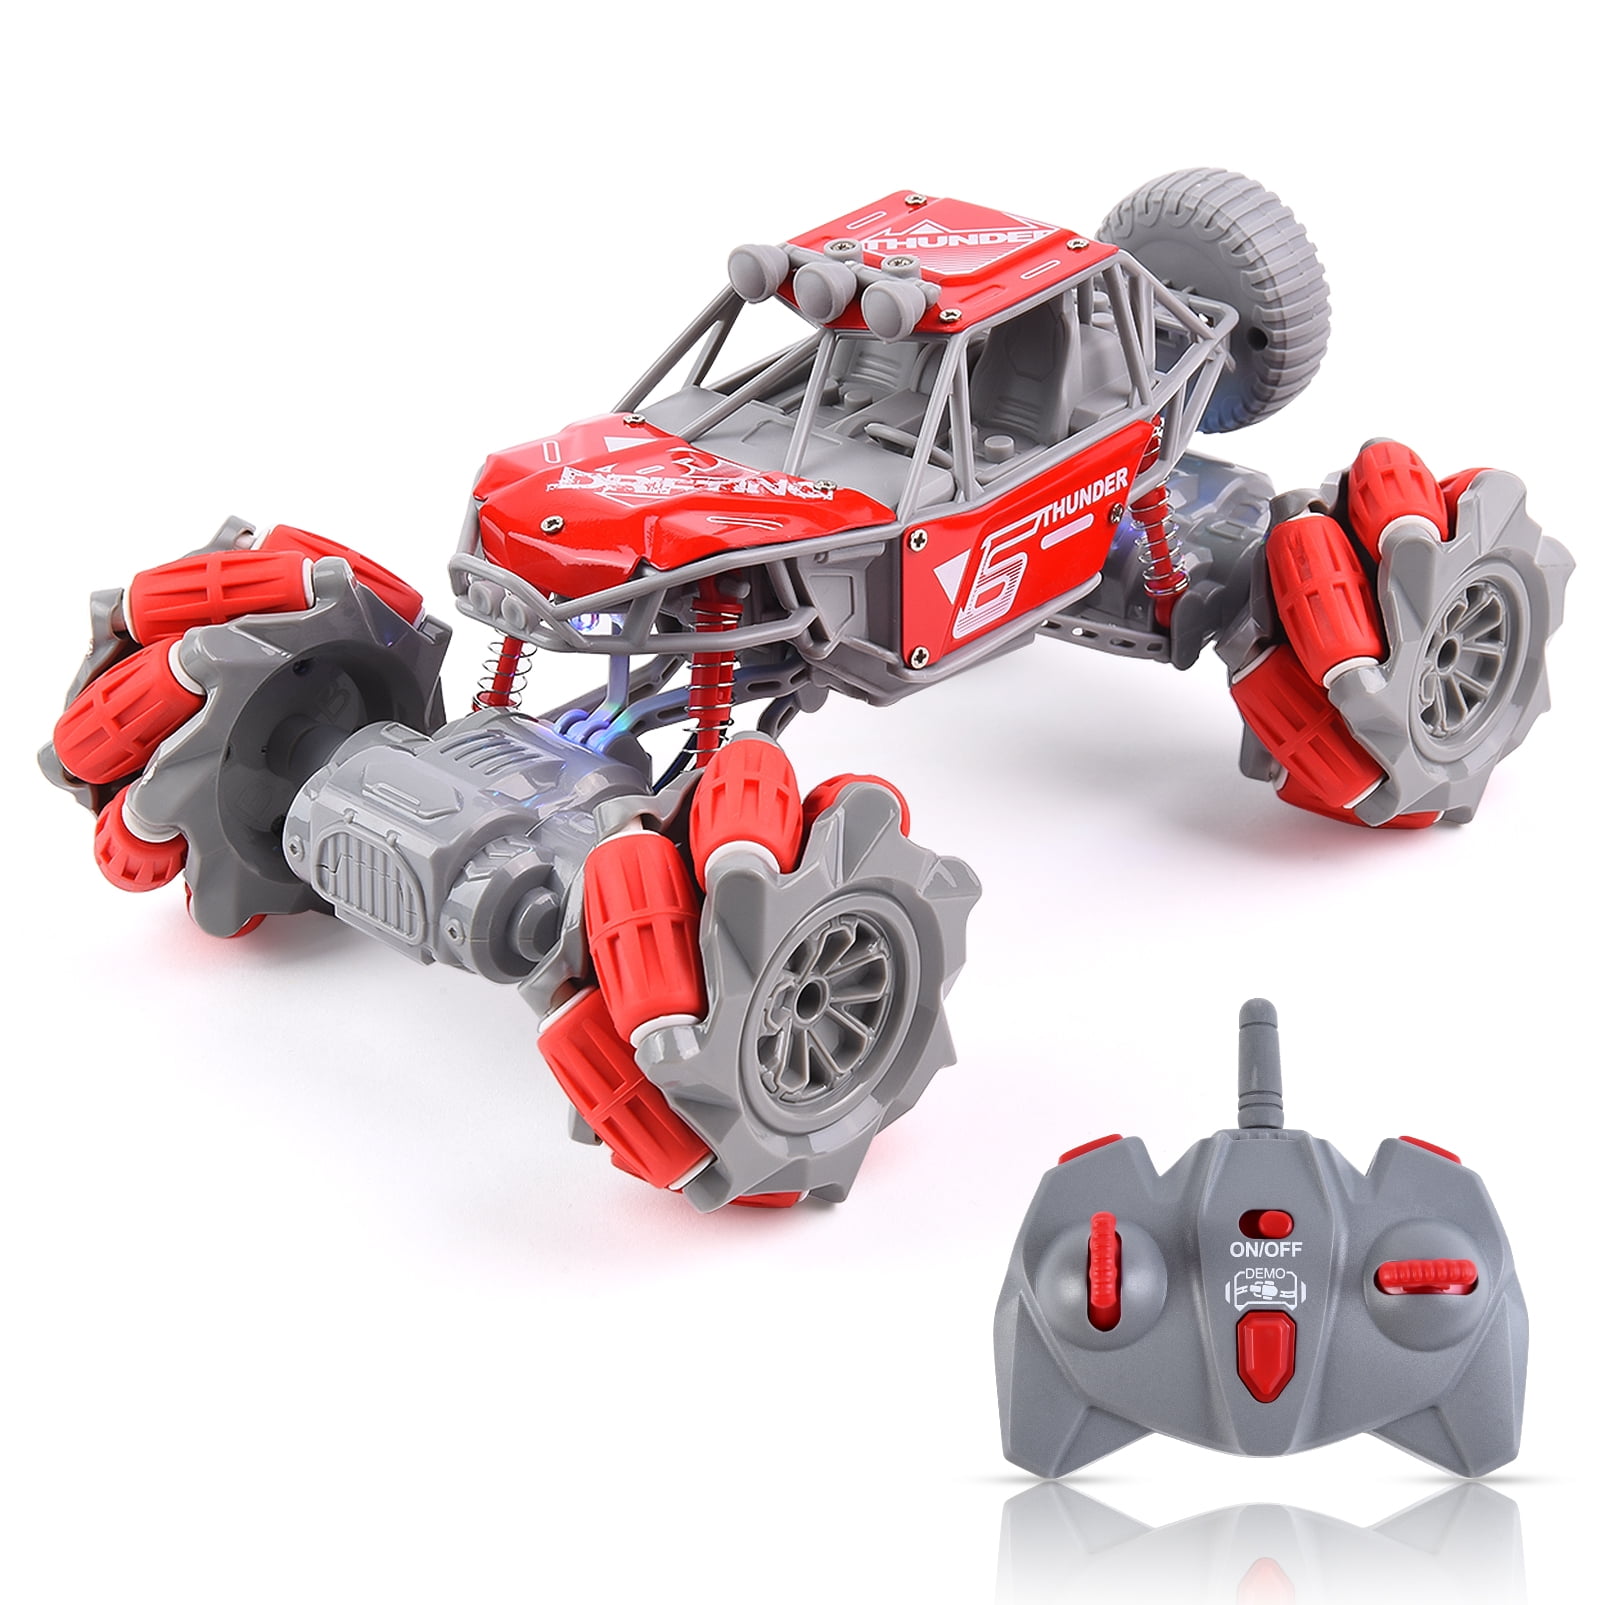 2.4 GHz 4WD RC Stunt Car with Headlights Details about   REAPP Remote Control Car for Kids ...